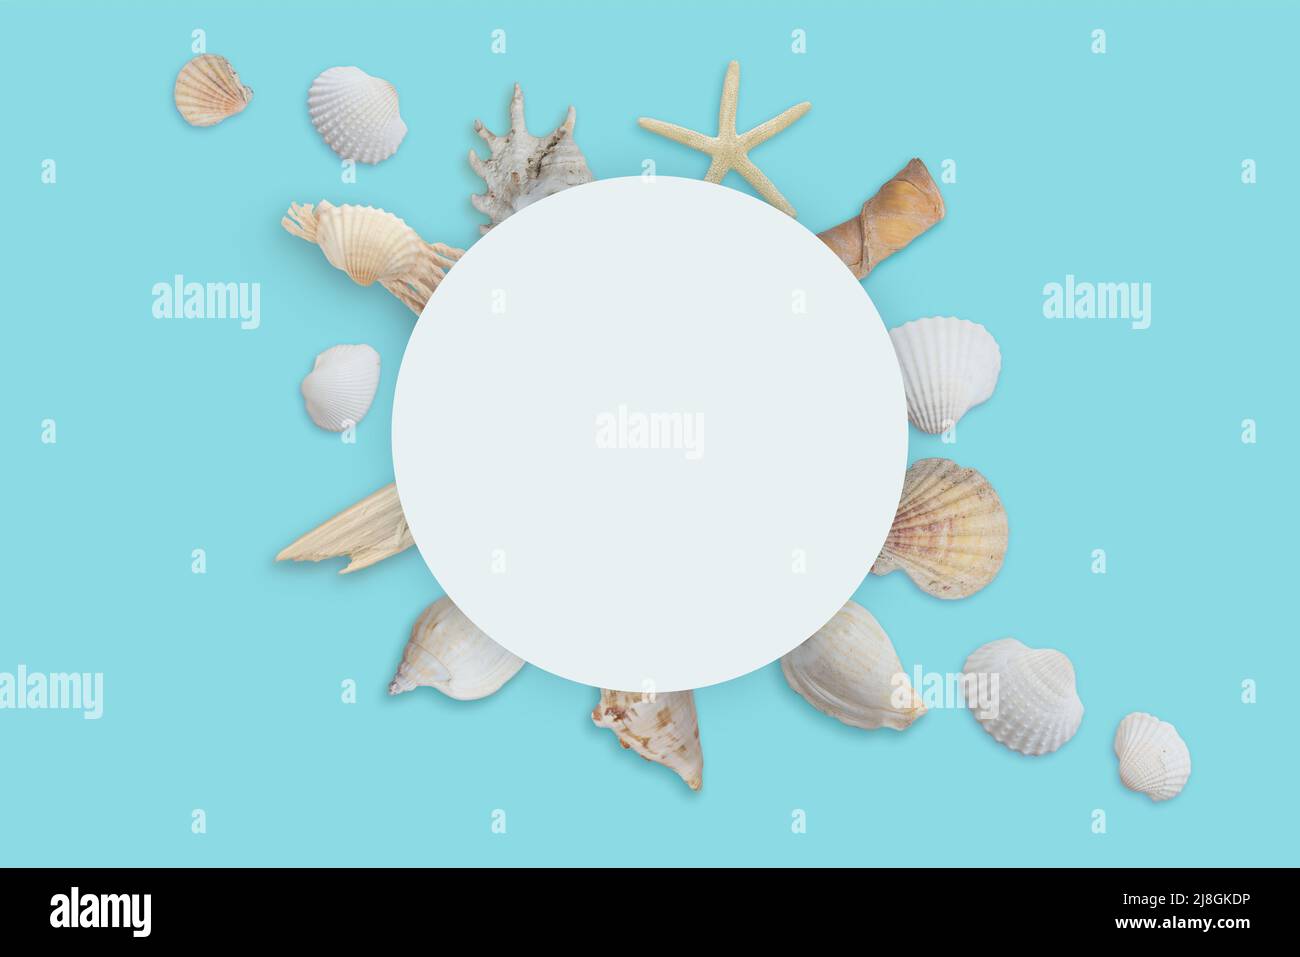 White round paper surrounded by shells. Summer travel background Stock Photo